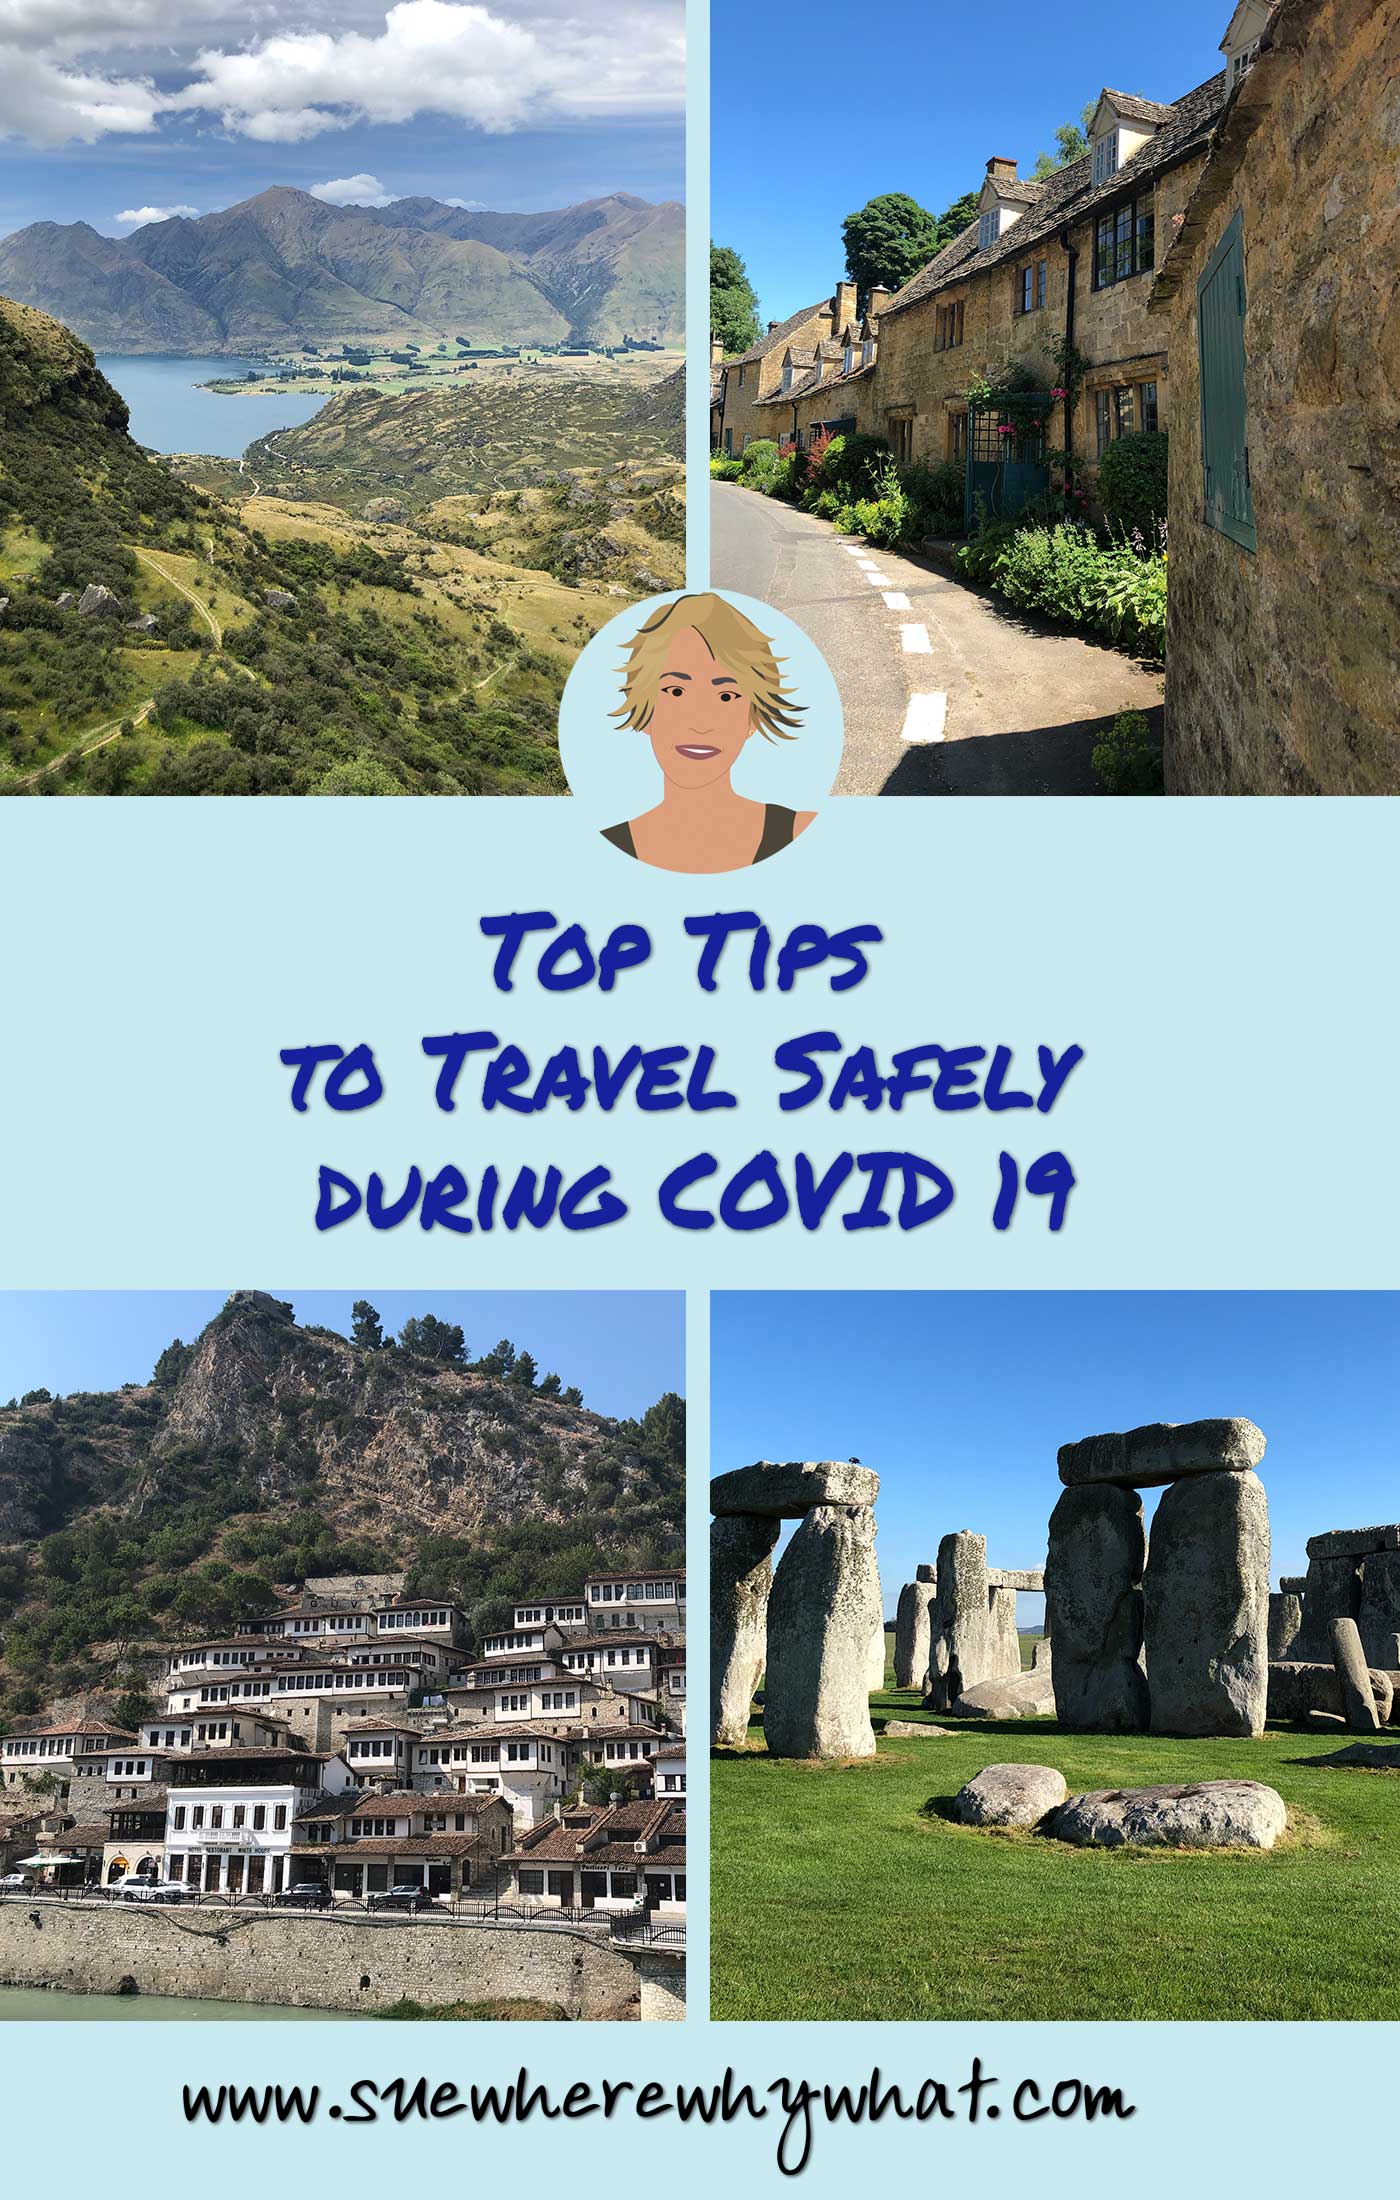 Top Tips to Travel Safely during COVID 19